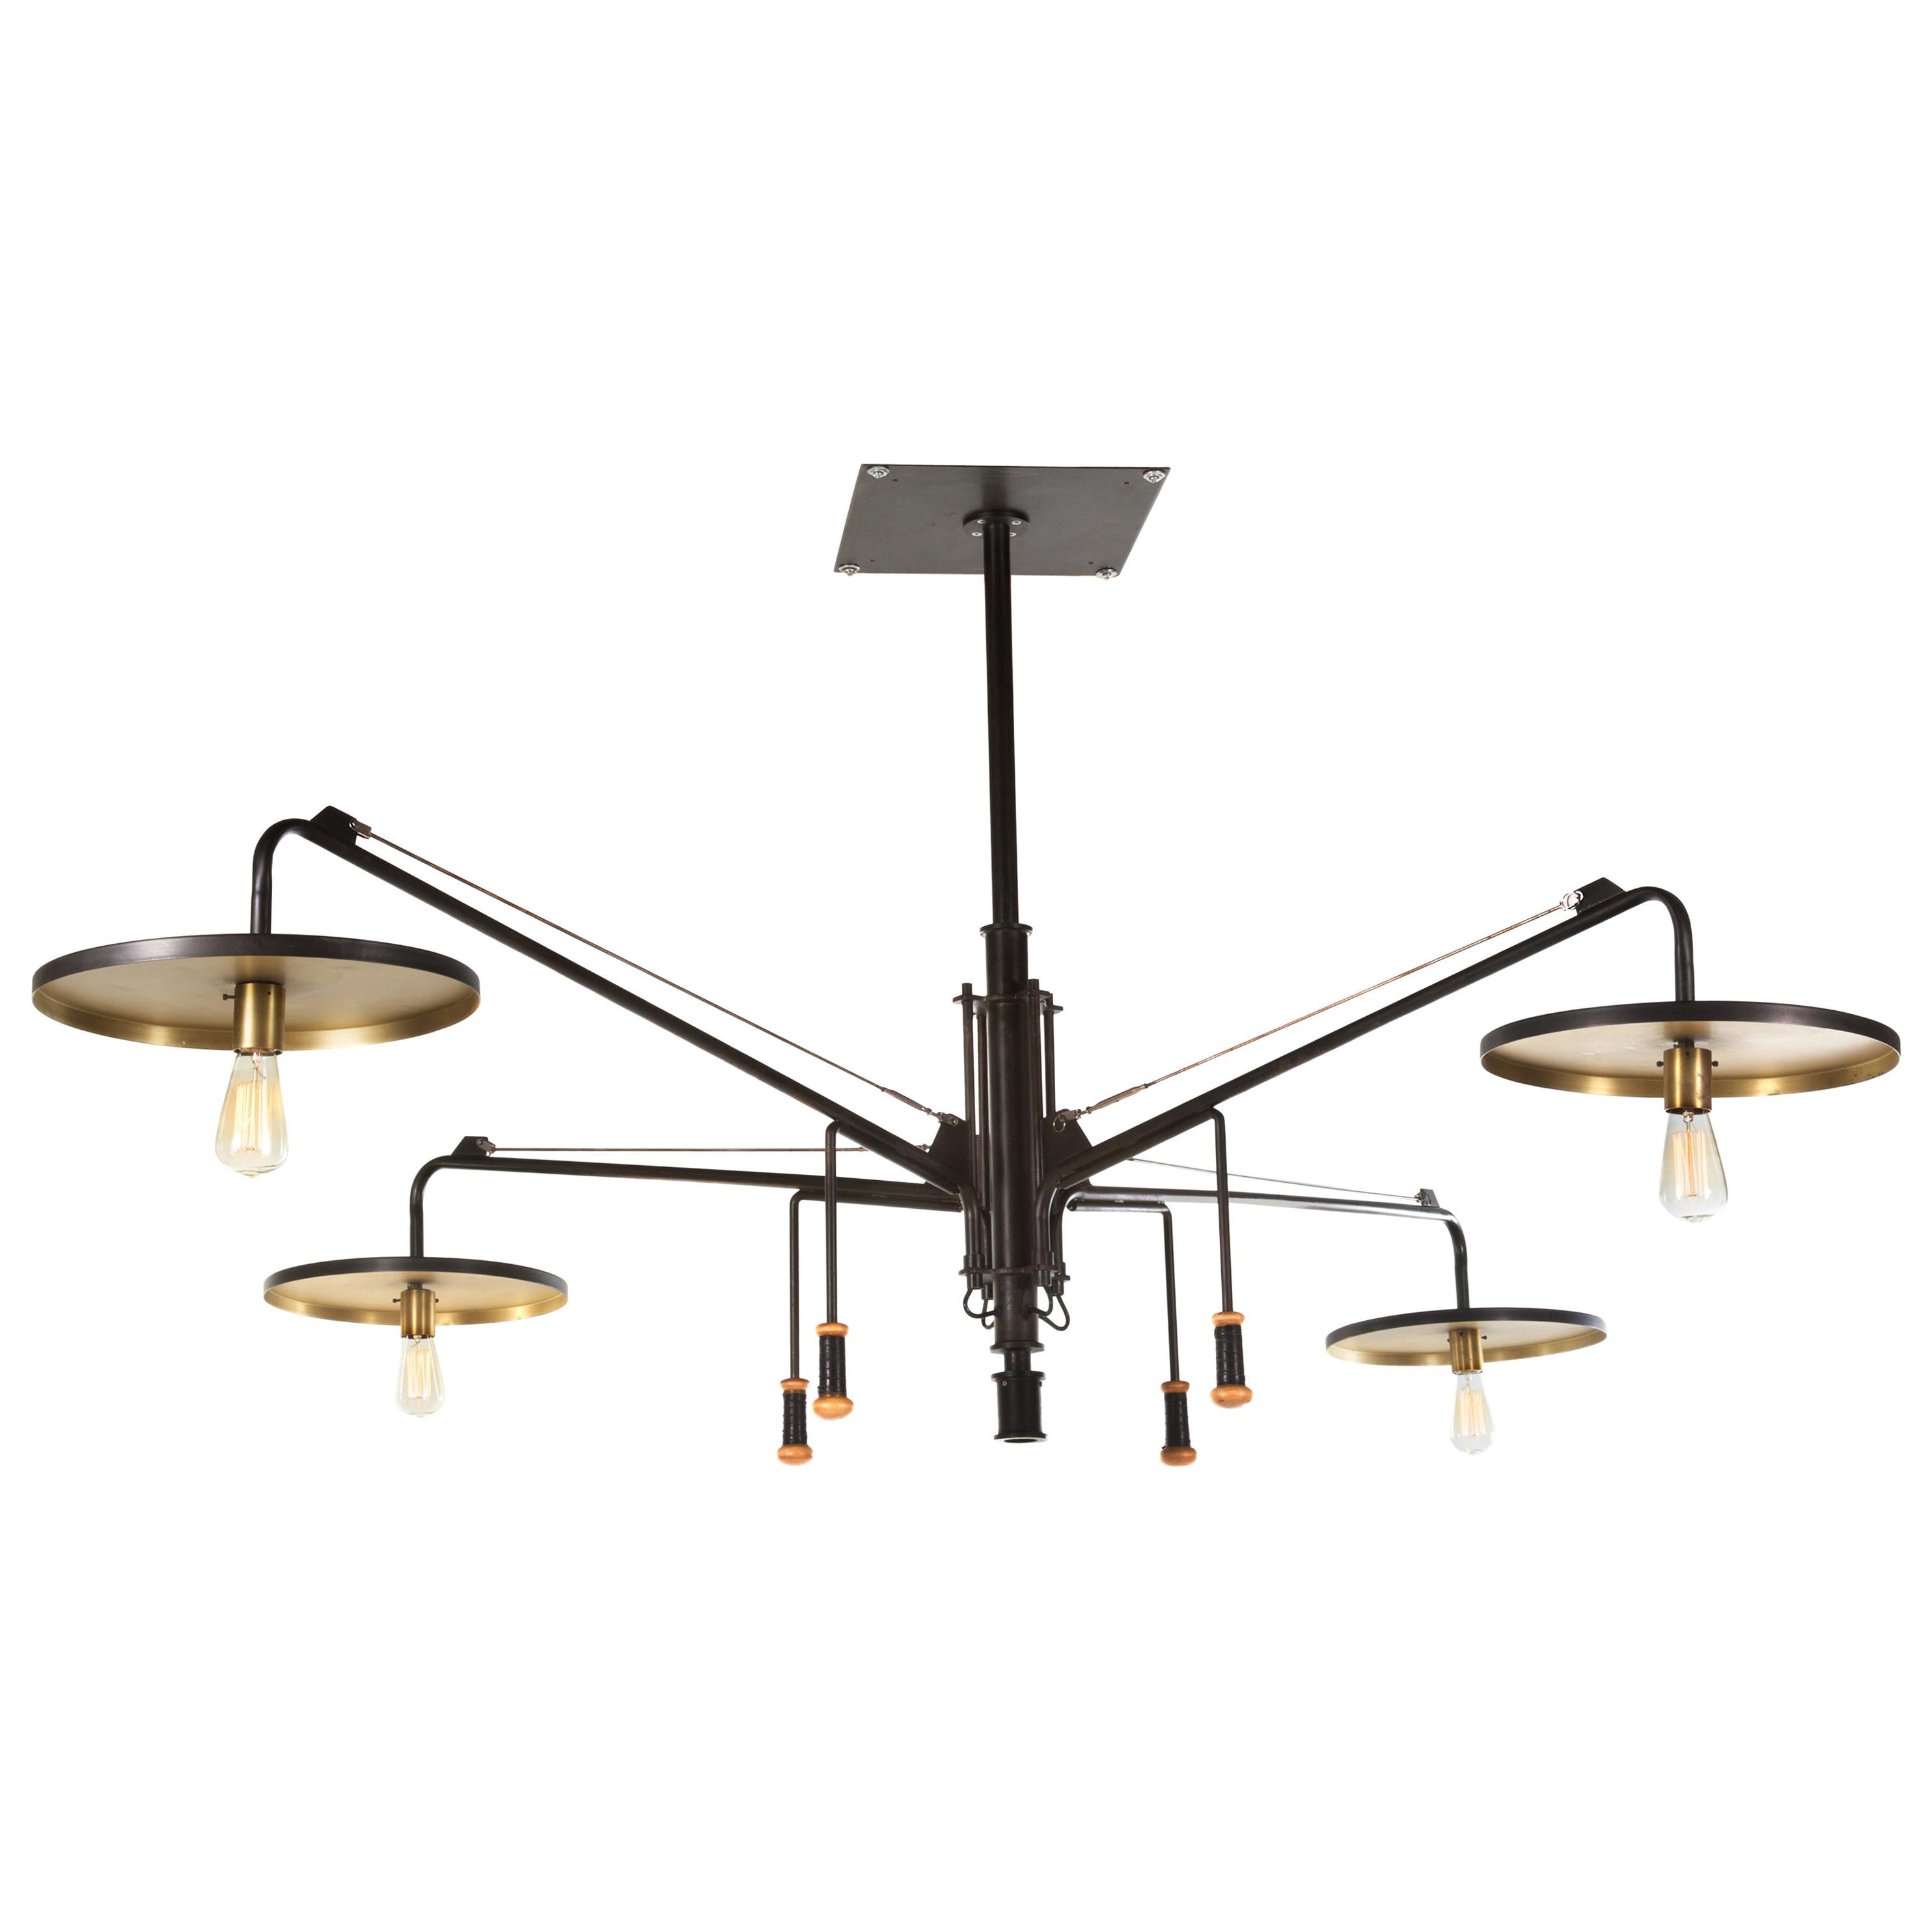 Grand Luminaire 4-Arm Light Fixture in Steel and Brass